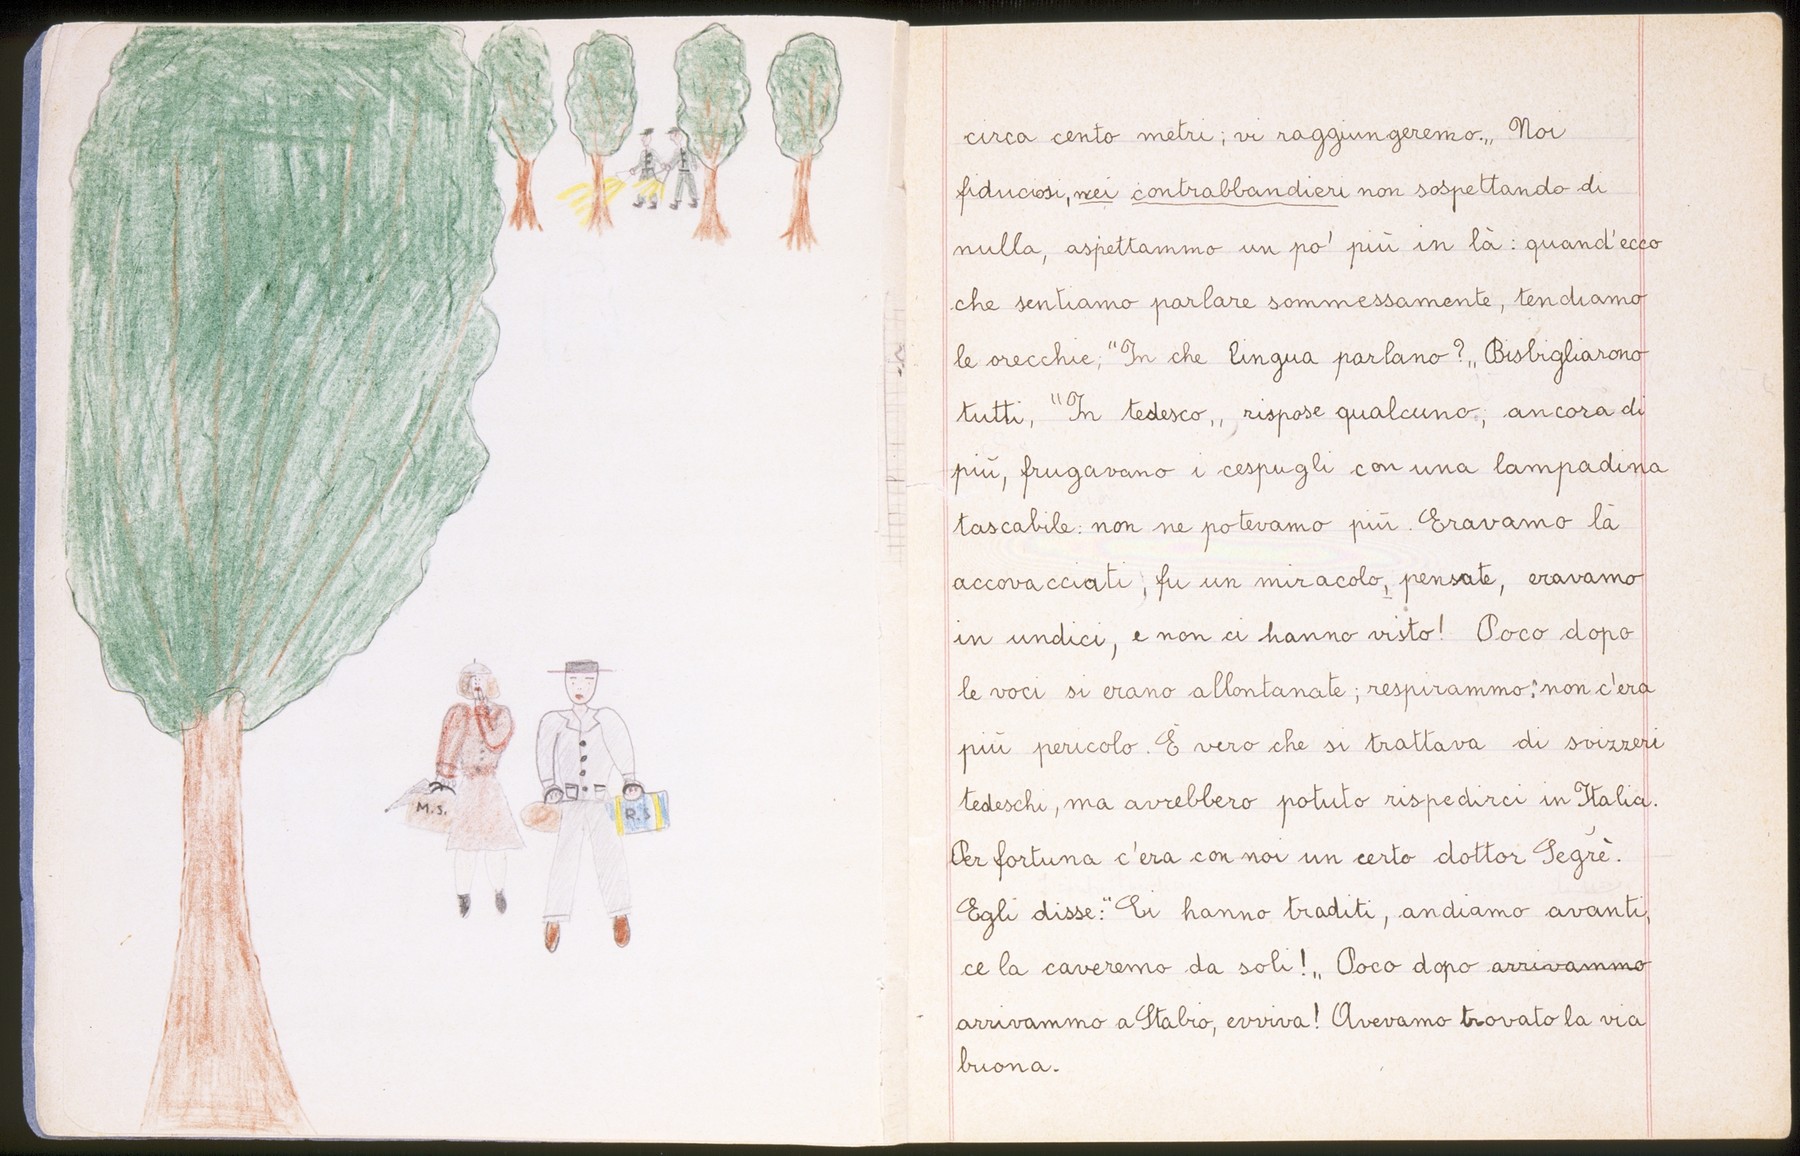 Illustrated page of a child's diary written in a Swiss refugee camp.  

The diary entry describes how they crossed the border into Switzerland. The text reads, "We came out of the woods and into a clearing: we had to be as quiet as possible because we were so close to the border.  Oh!  I almost forgot!  Before we came out of the woods, they made us stand still for a quarter of an hour while they went to explore the area and to cut through the fence. Fortunately, shortly thereafter, we began to walk again.  We saw a small guard station that was literally in front of the hole in the fence, fortunately the guard was not there.  One by one, silently, we went through the hole in the fence.  What emotion!  Finally, we were in free territory, in Switzerland."